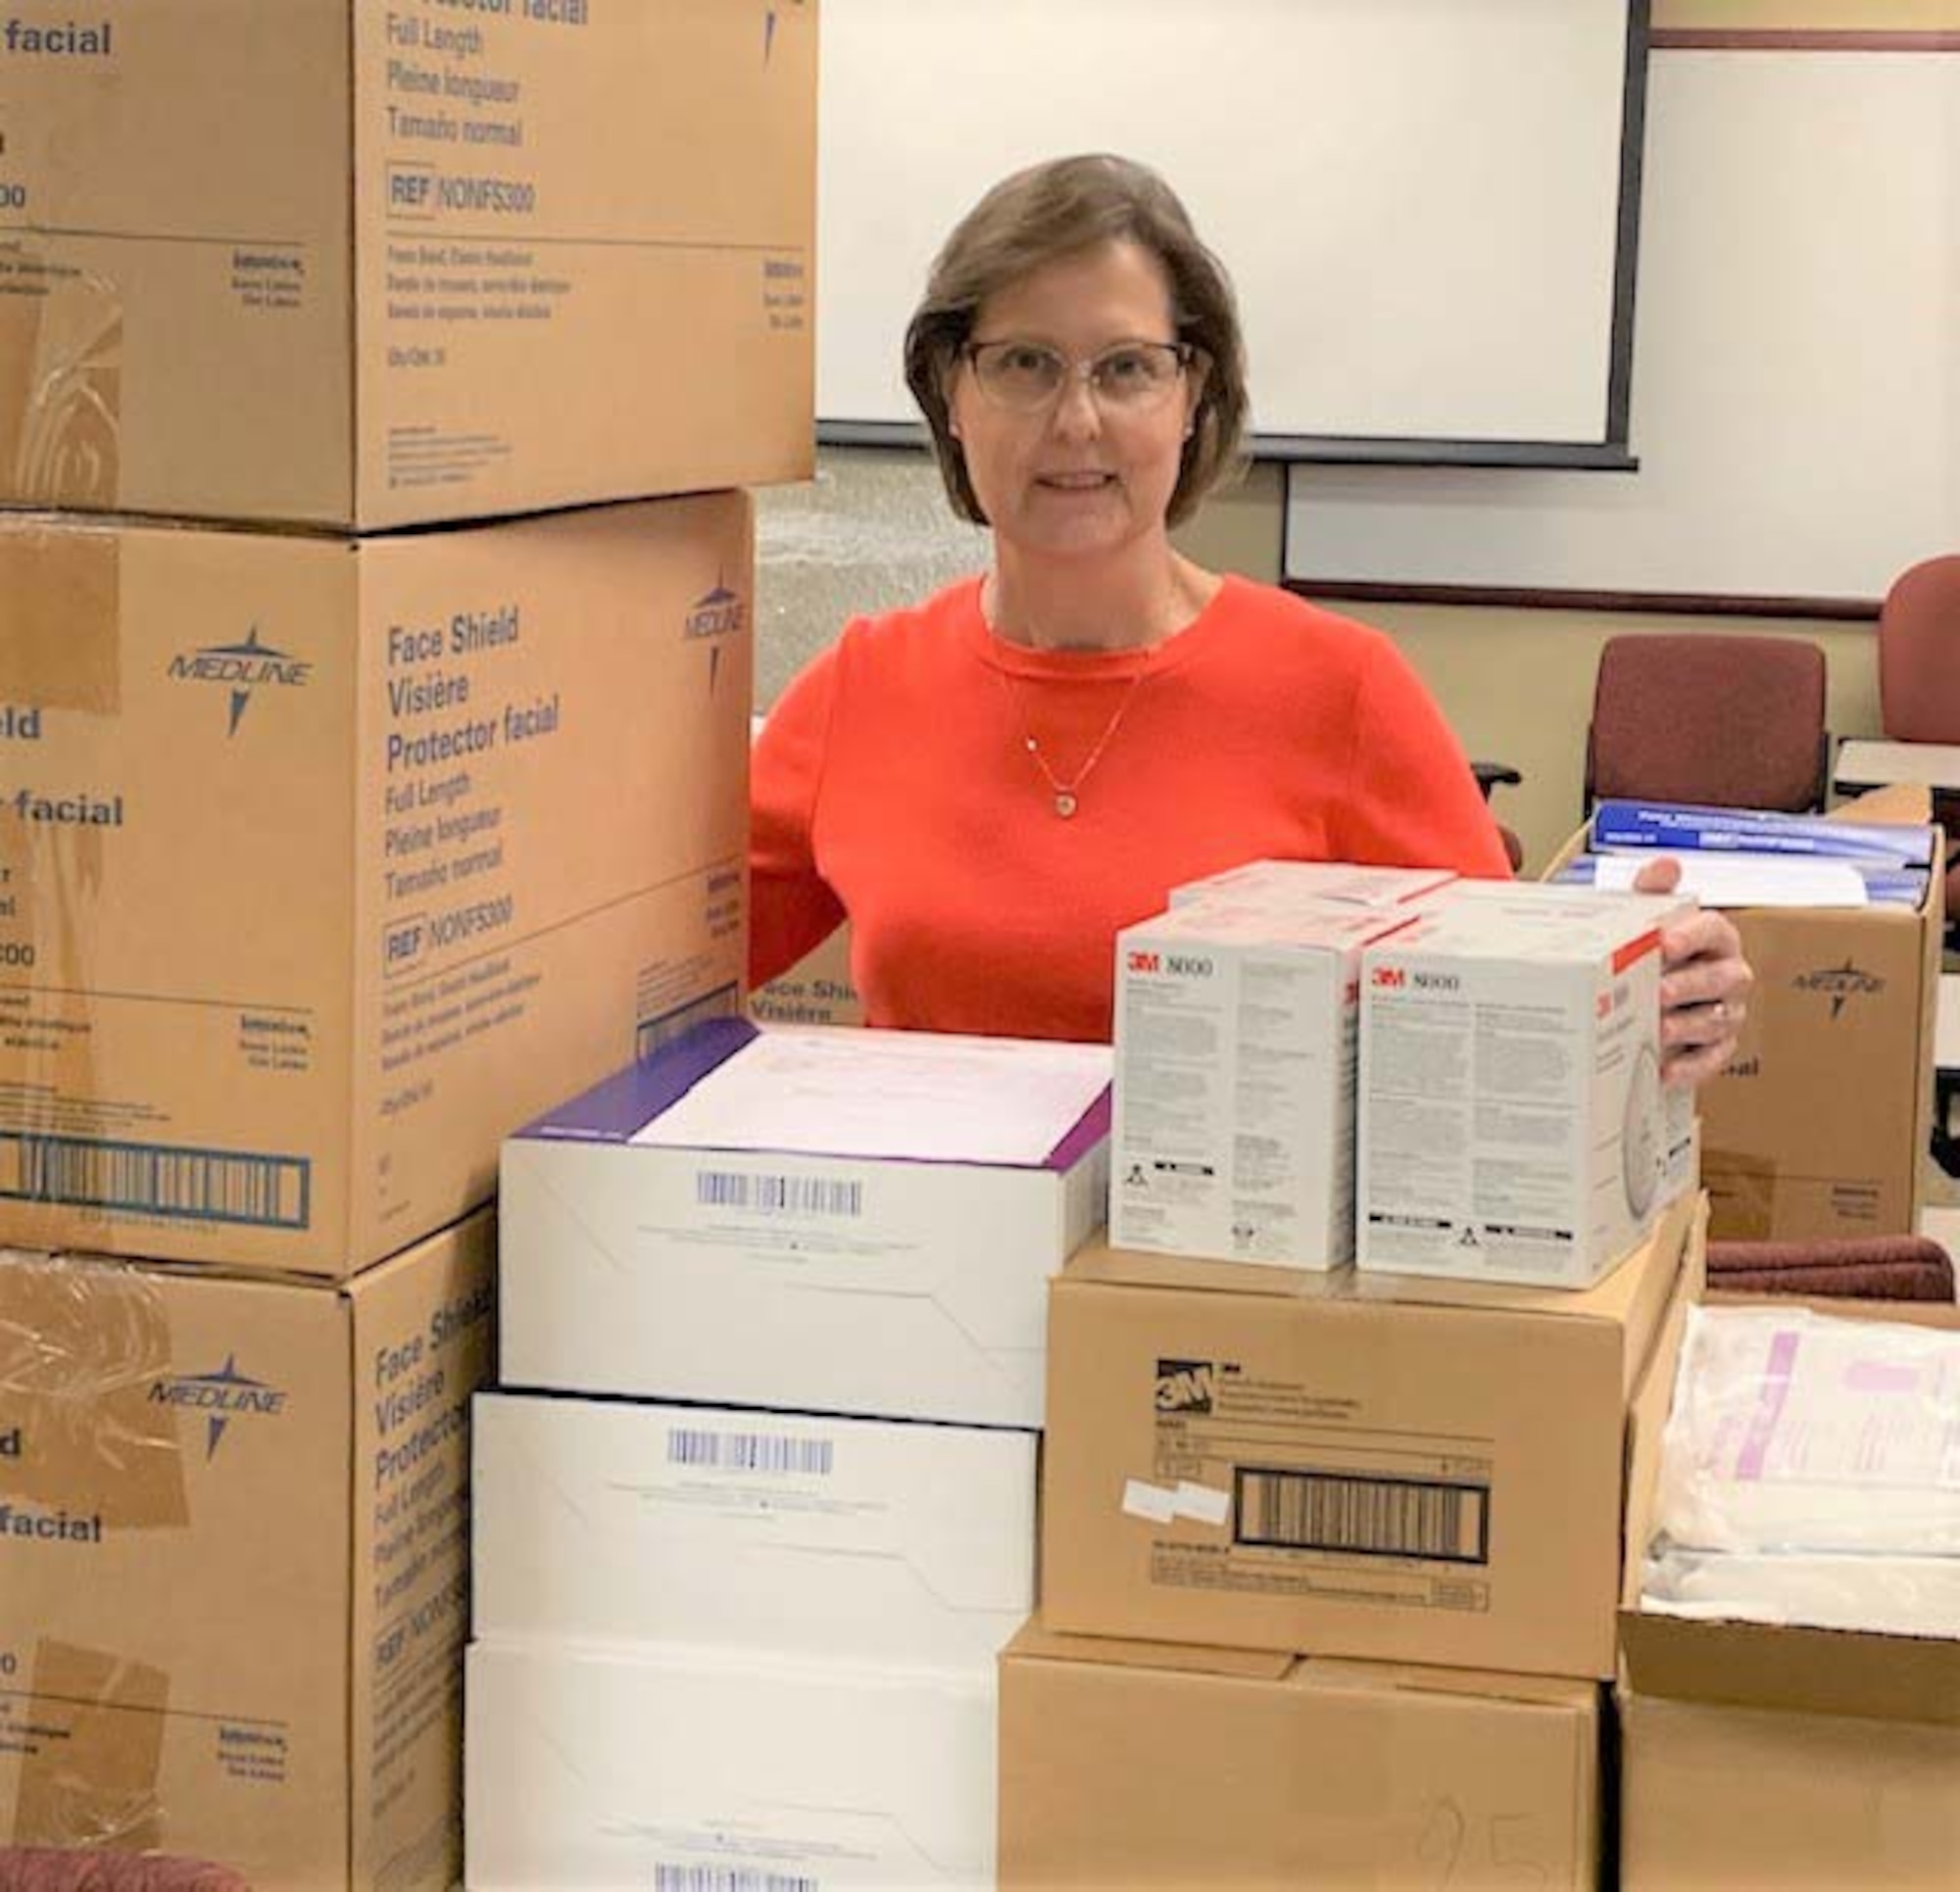 Photo of female Air Force Reservist standing behind boxes of personal protective equipment.